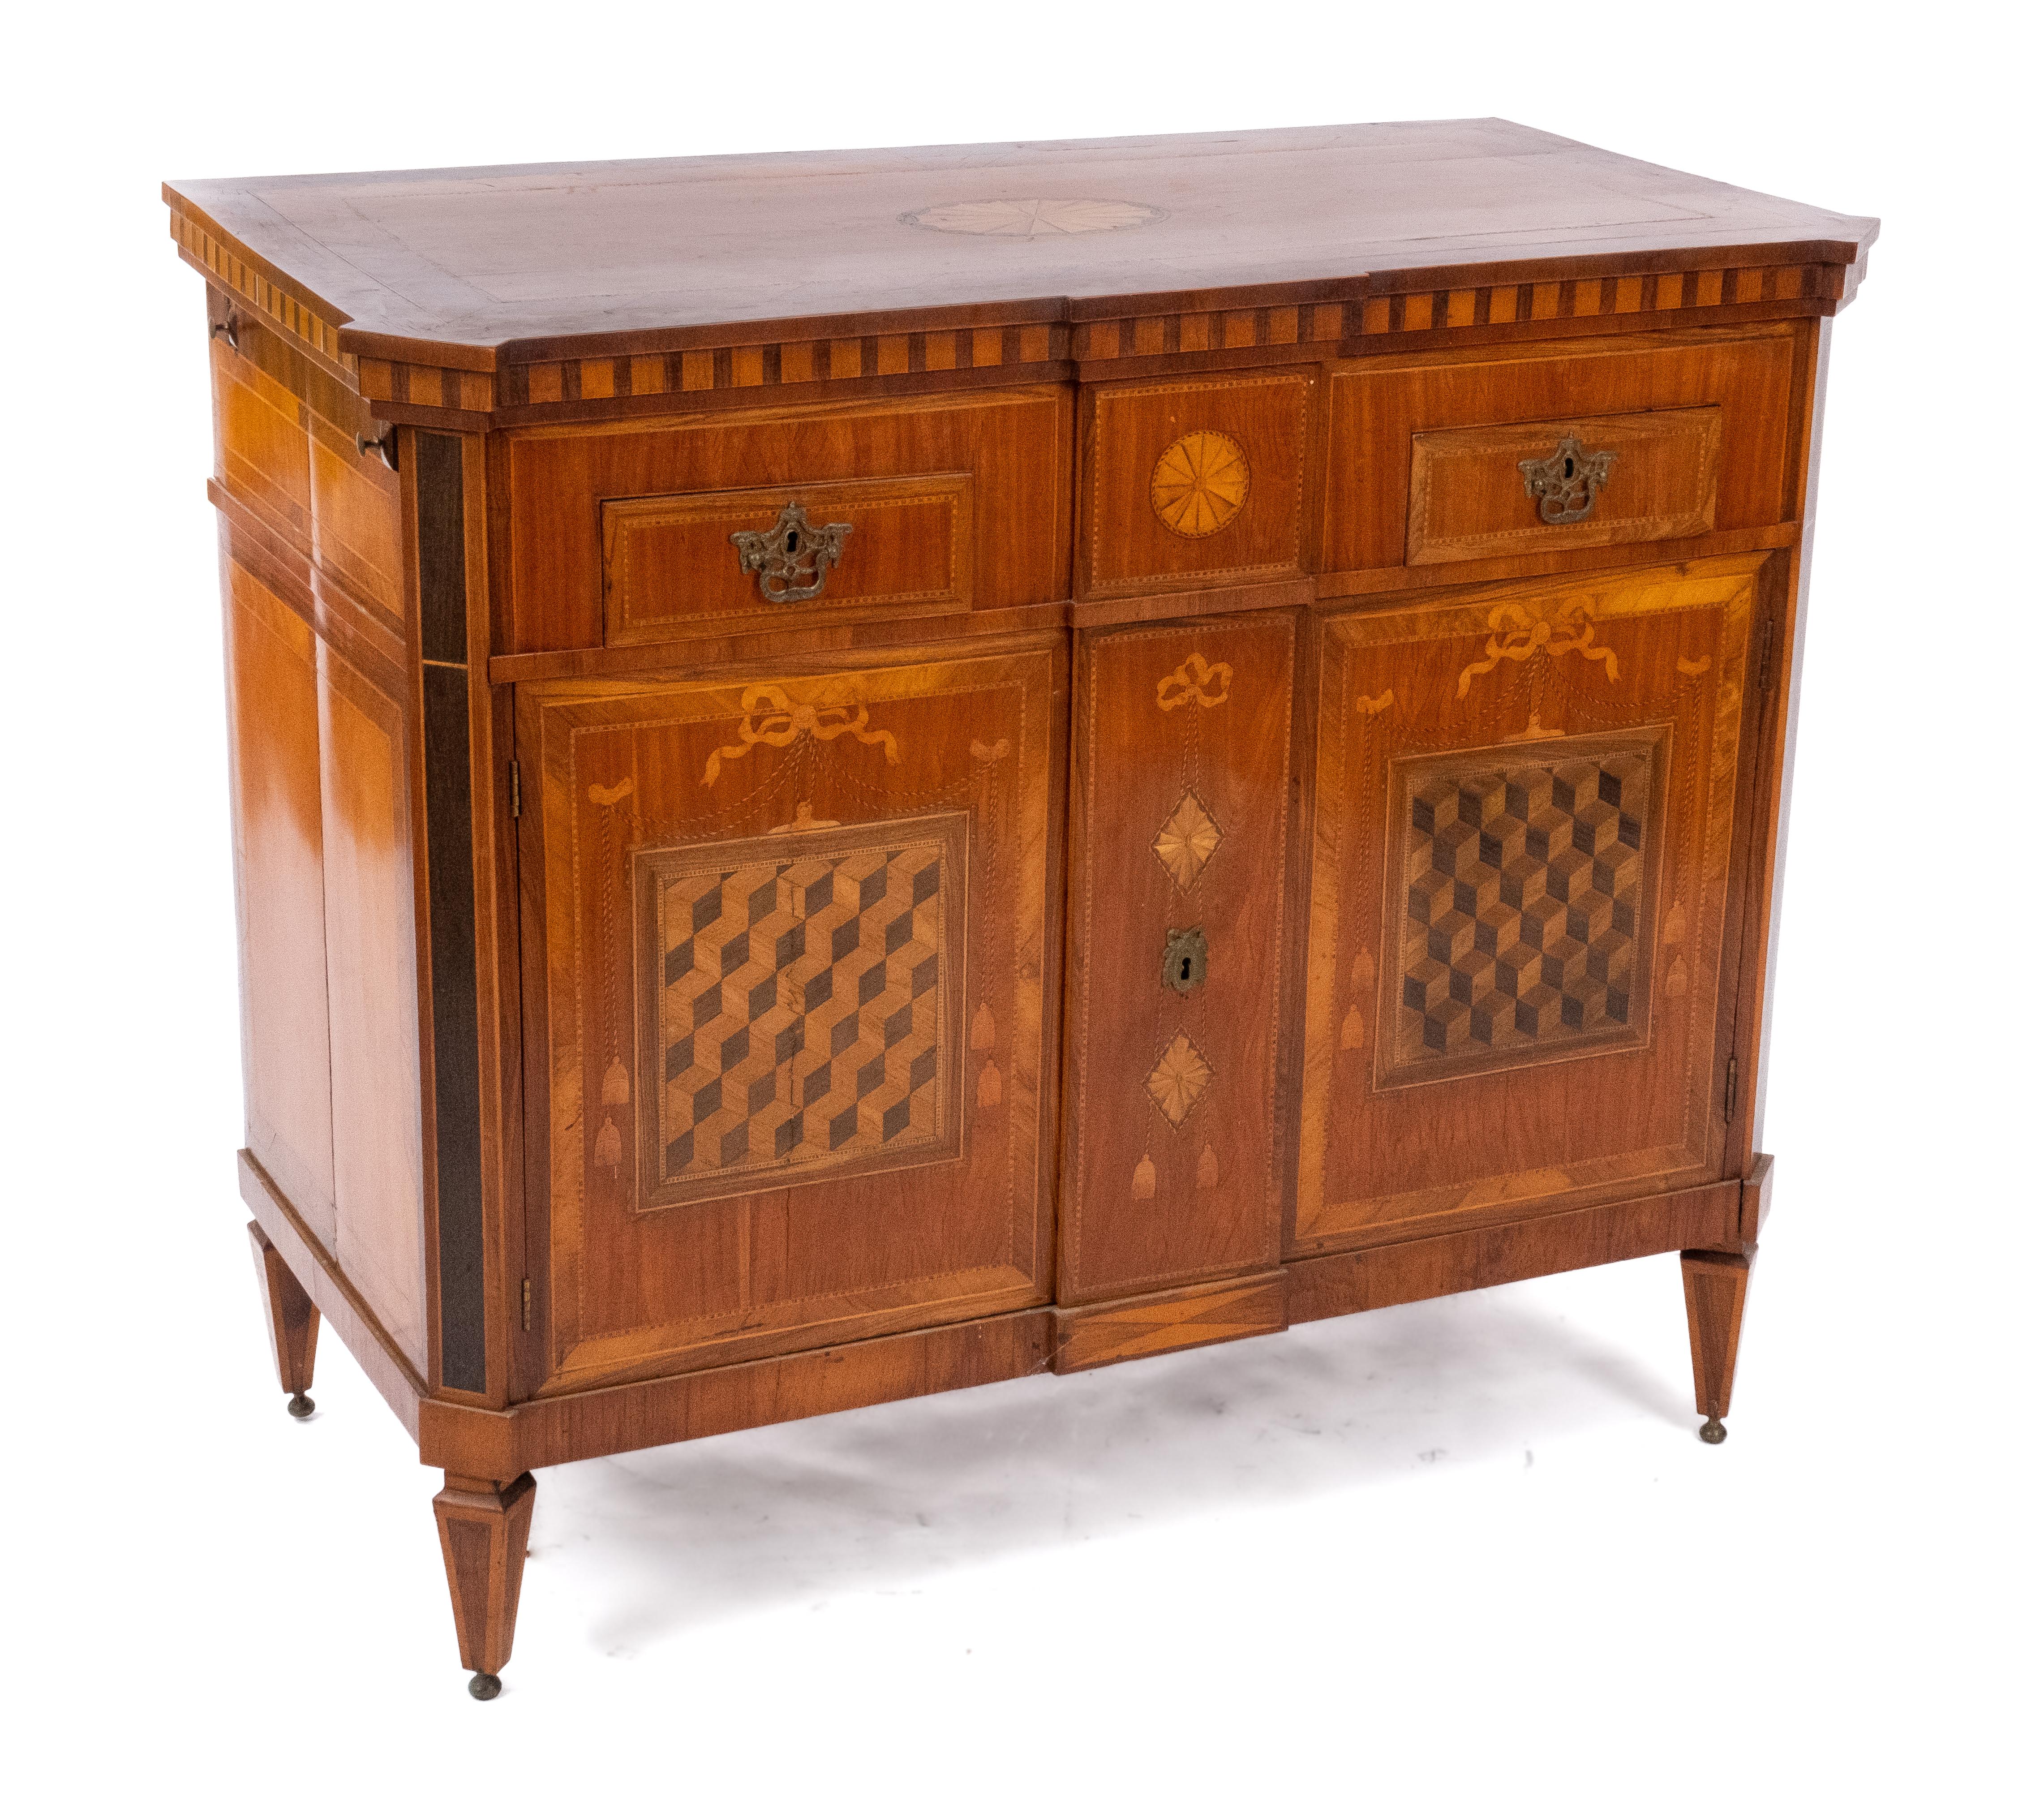 A Dutch satinwood, tulipwood, kingwood and fruitwood marquetry and parquetry sideboard 'klapbuffet' - Image 2 of 3